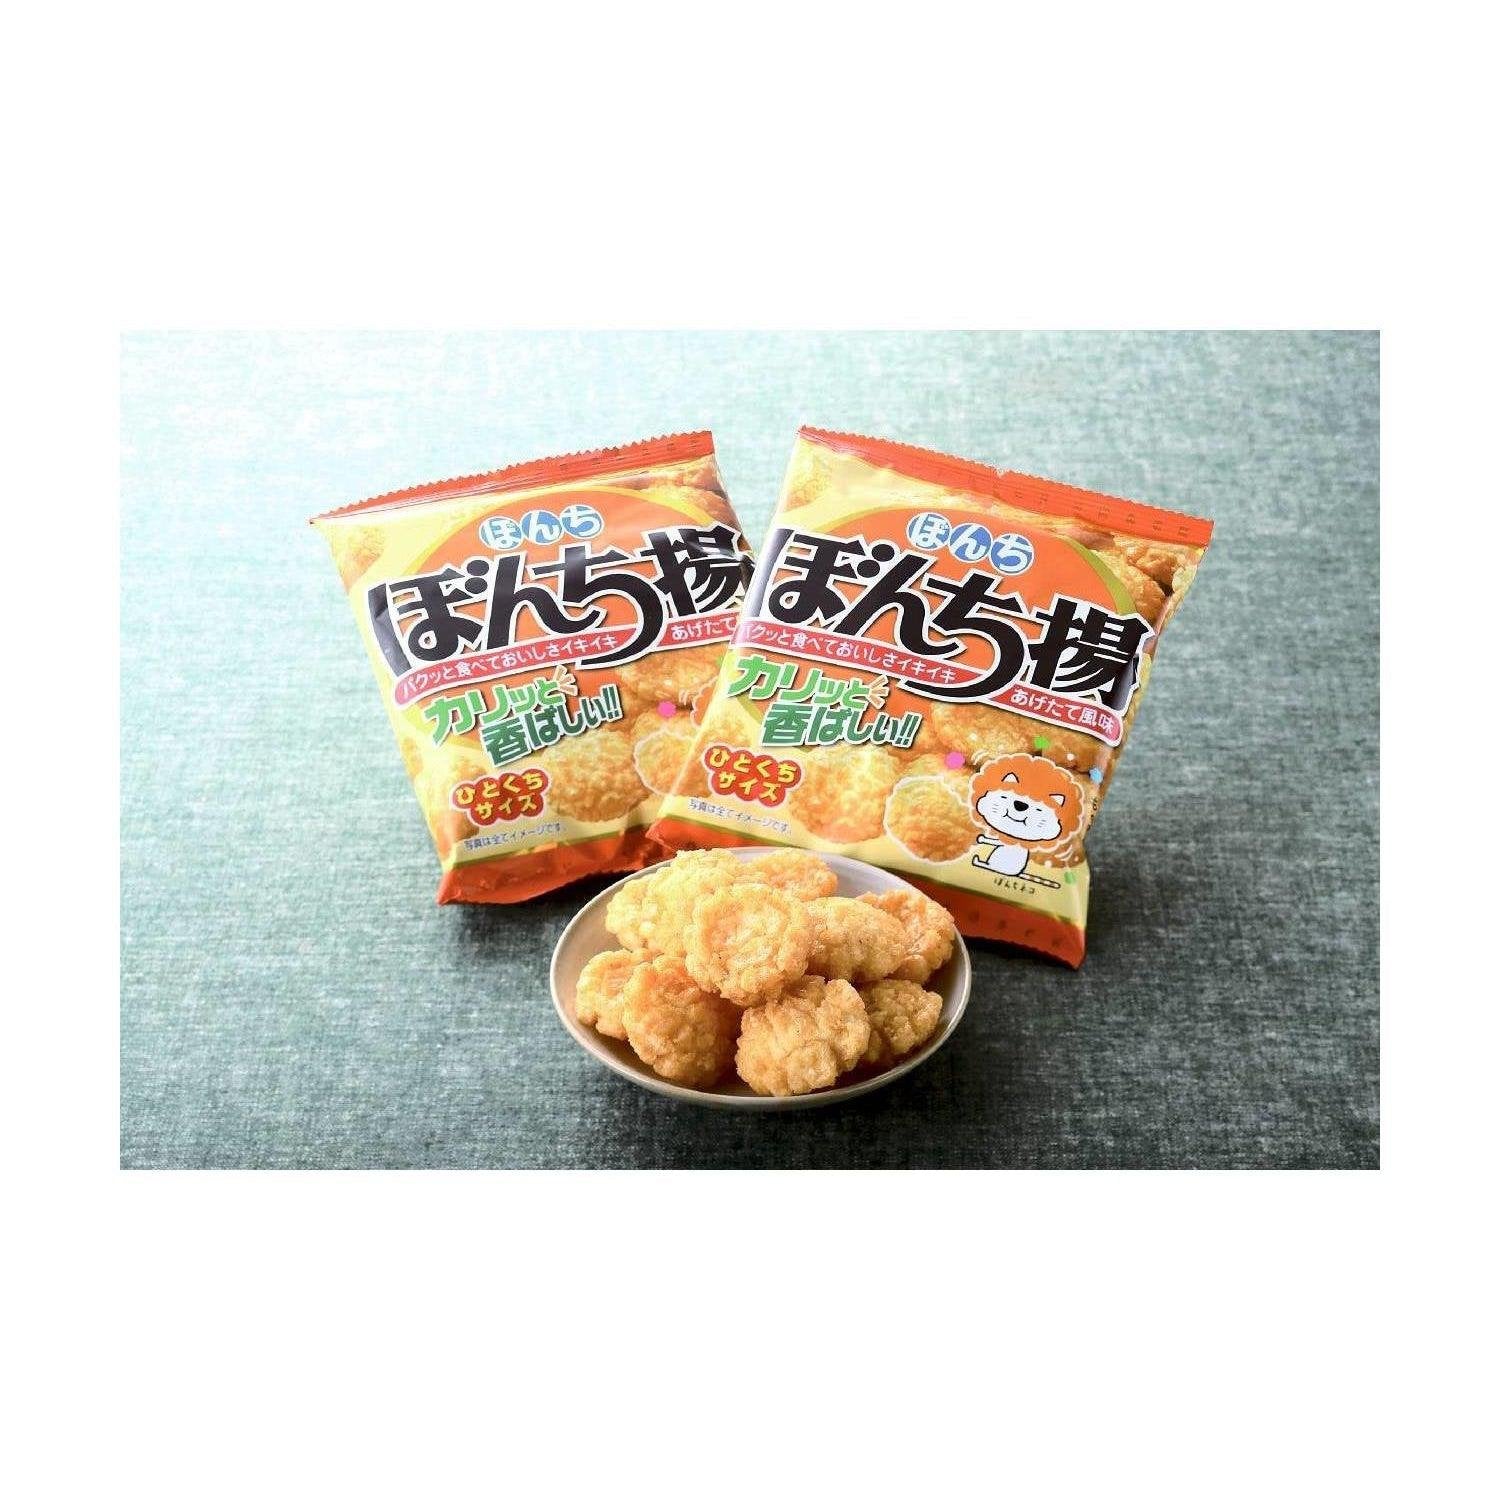 Bonchi Age Fried Rice Crackers Soy Sauce Flavor 100g (Pack of 3) - YOYO JAPAN